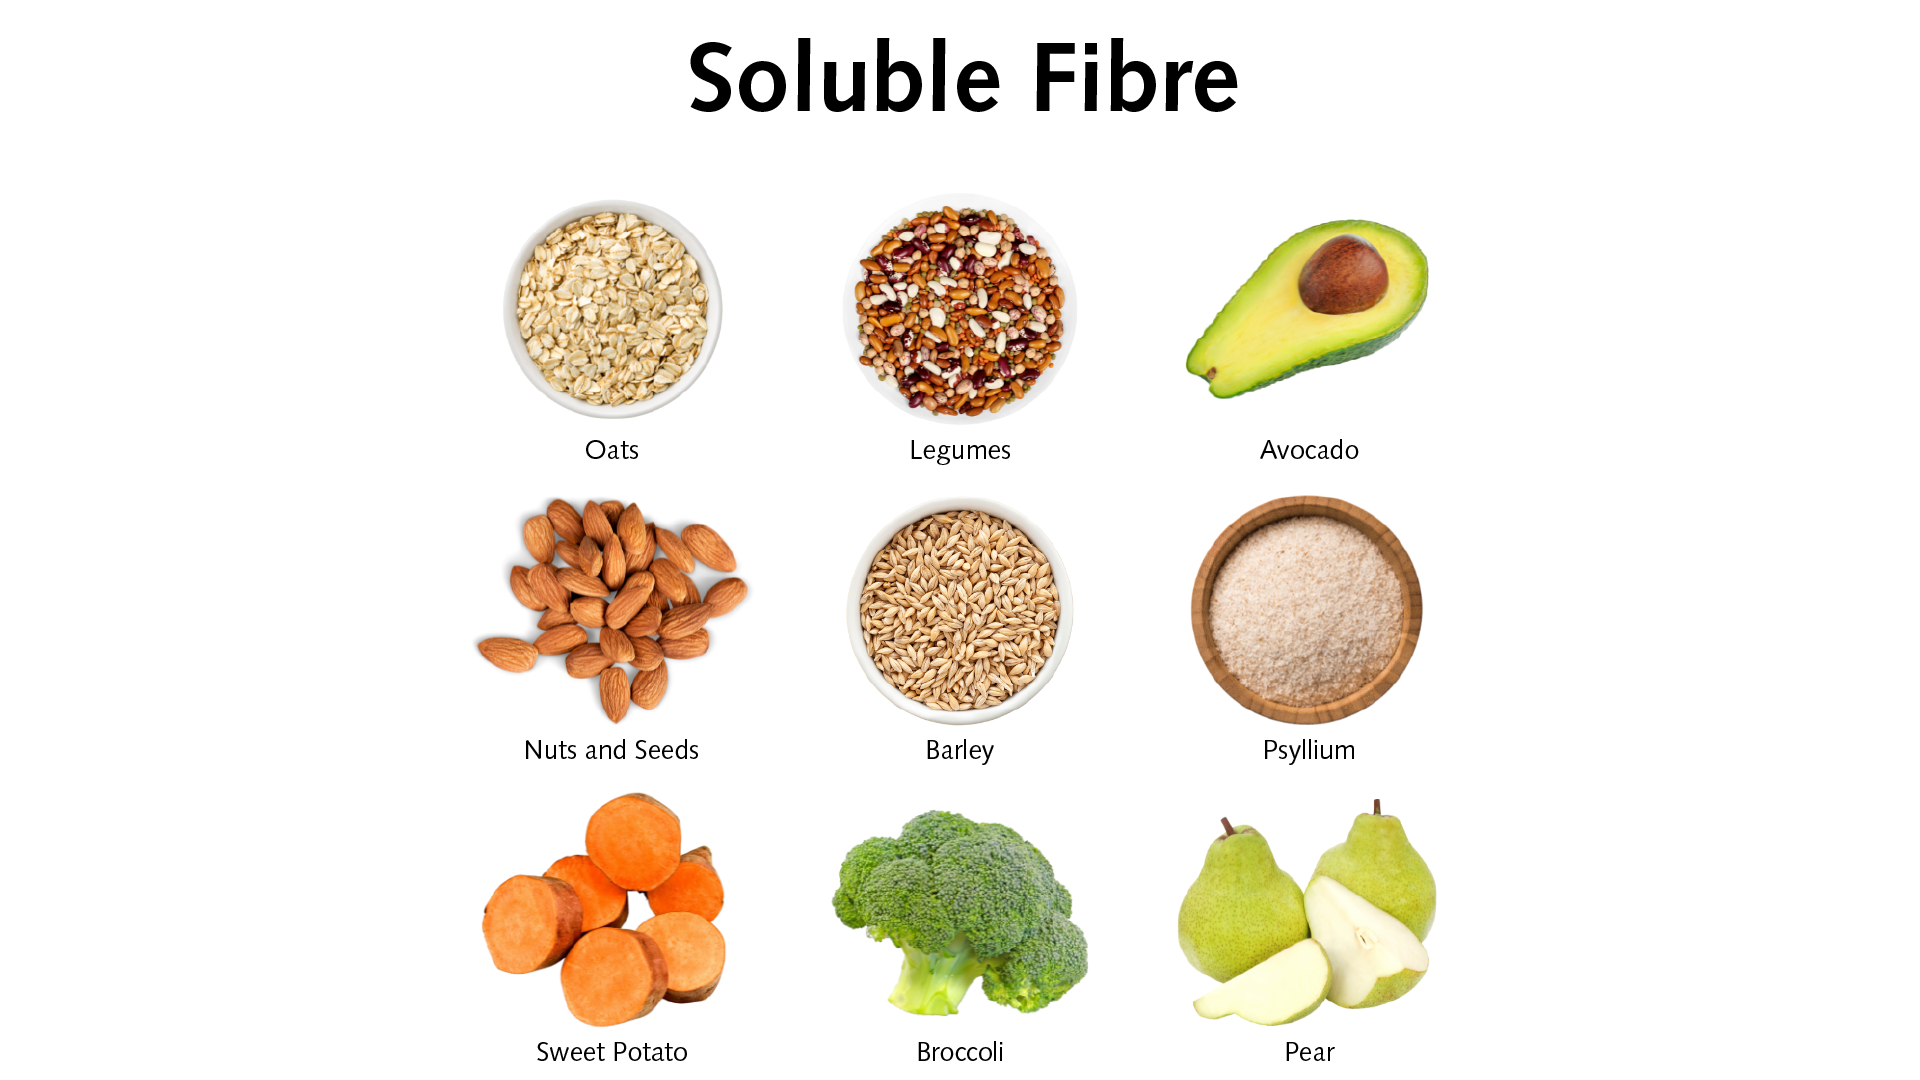 Foods with soluble fibre include Oats, Legumes, Avocado, Nuts and Seeds, Barley, Psyllium, Sweet potato, Broccoli and Pear.